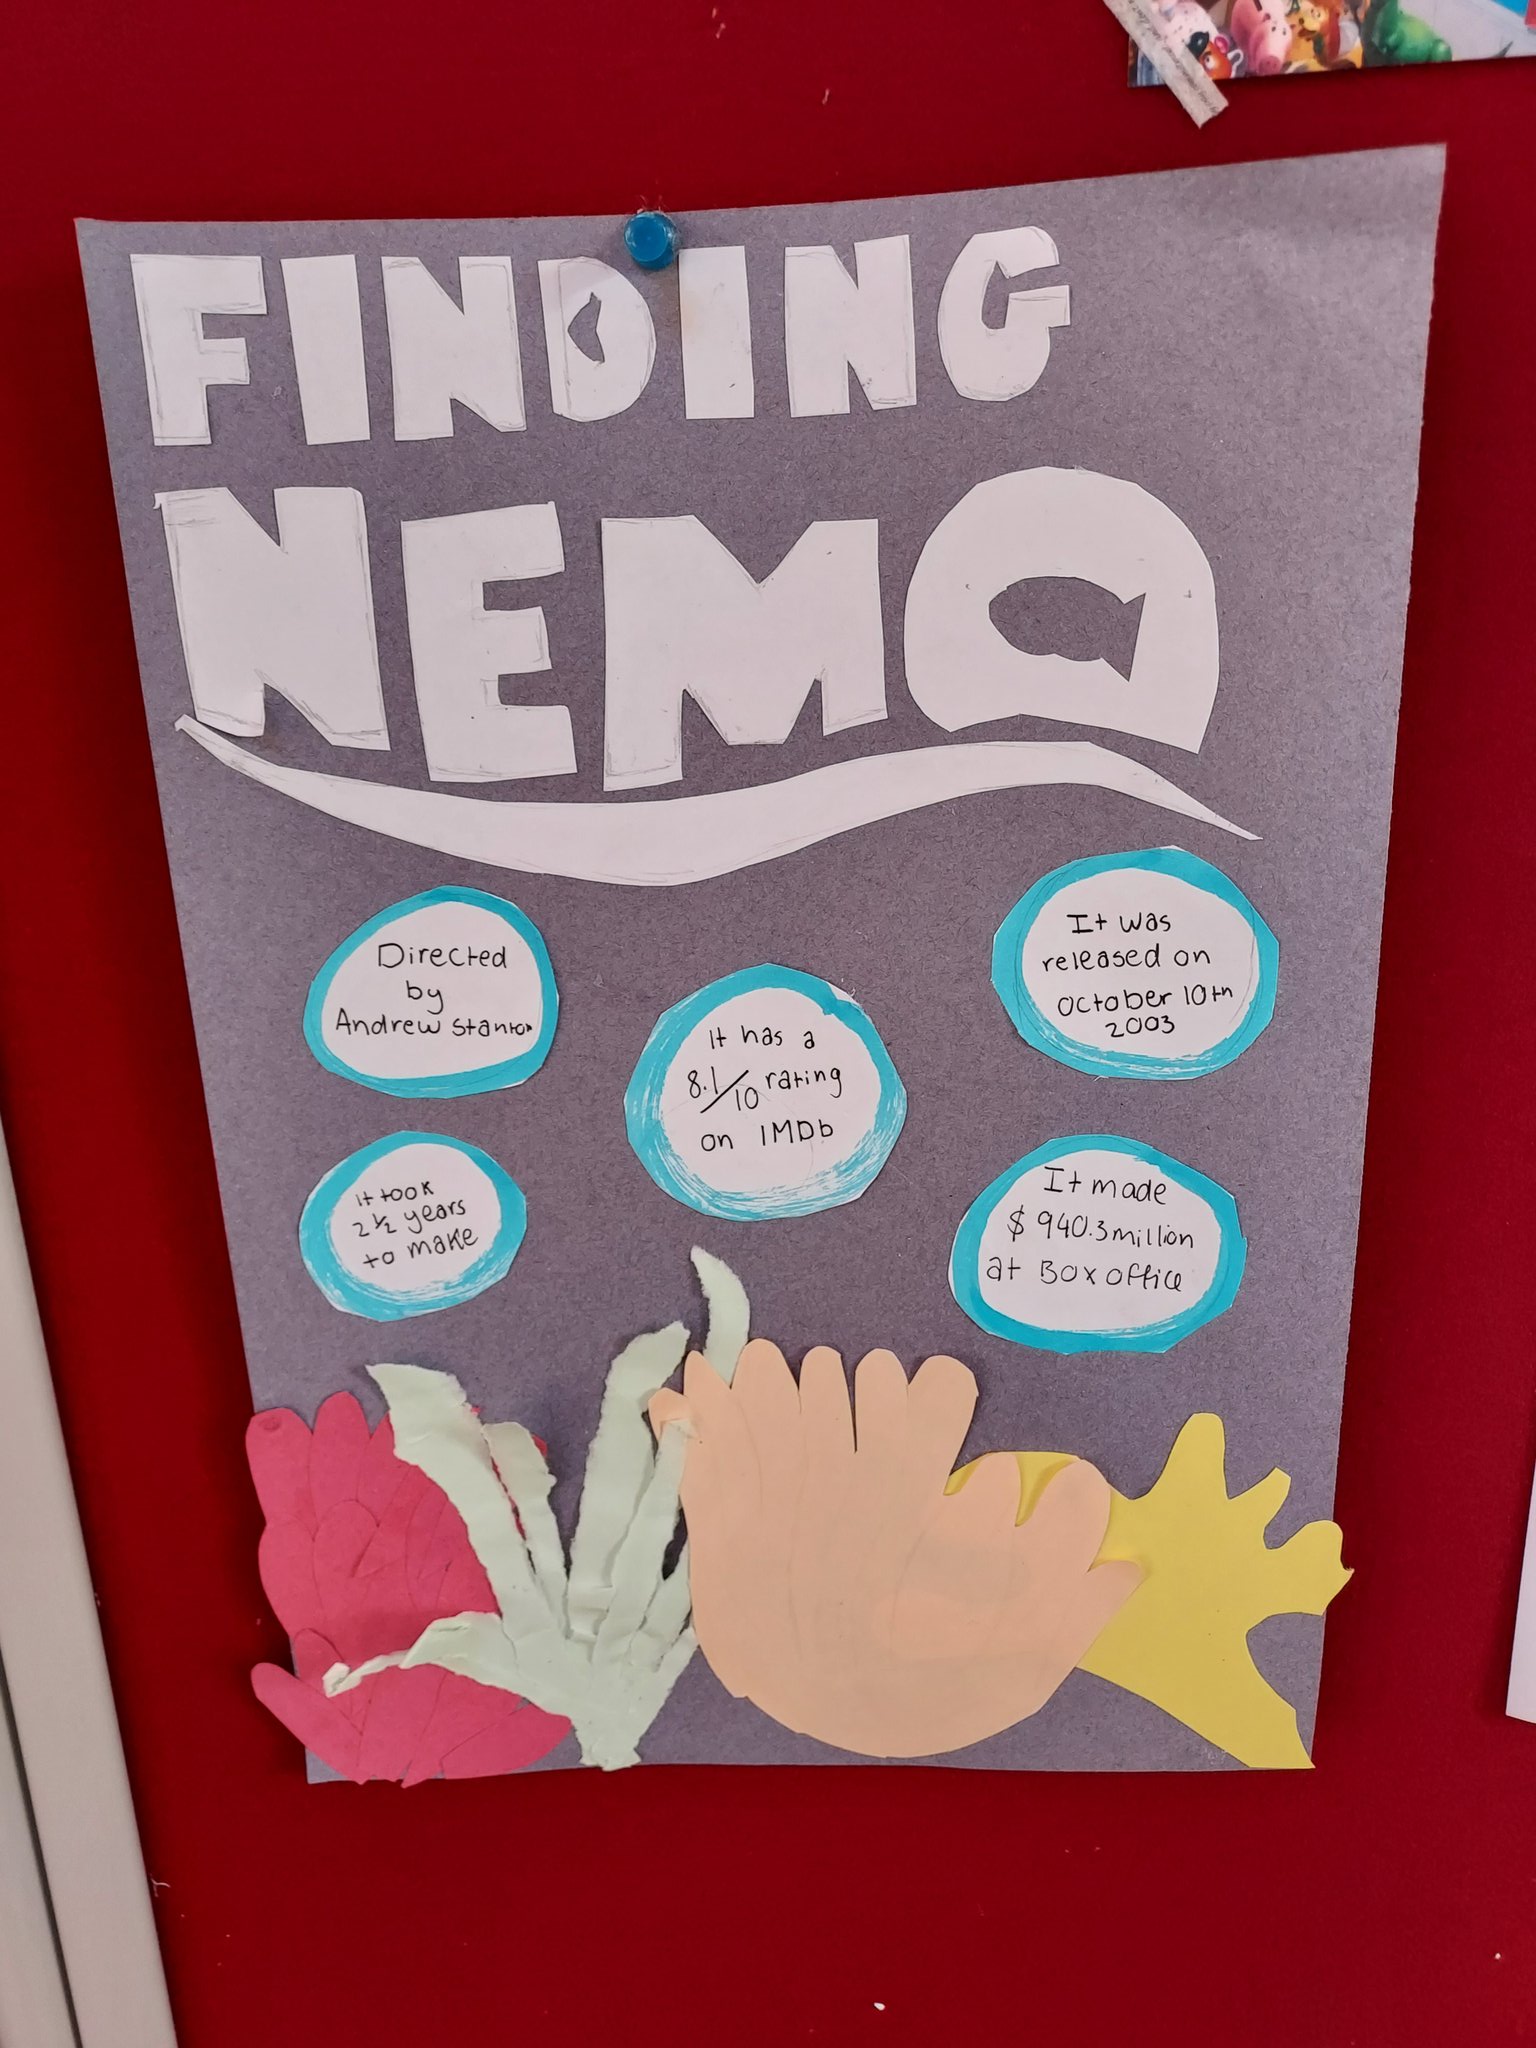 Finding Nemo poster made by Mimi.